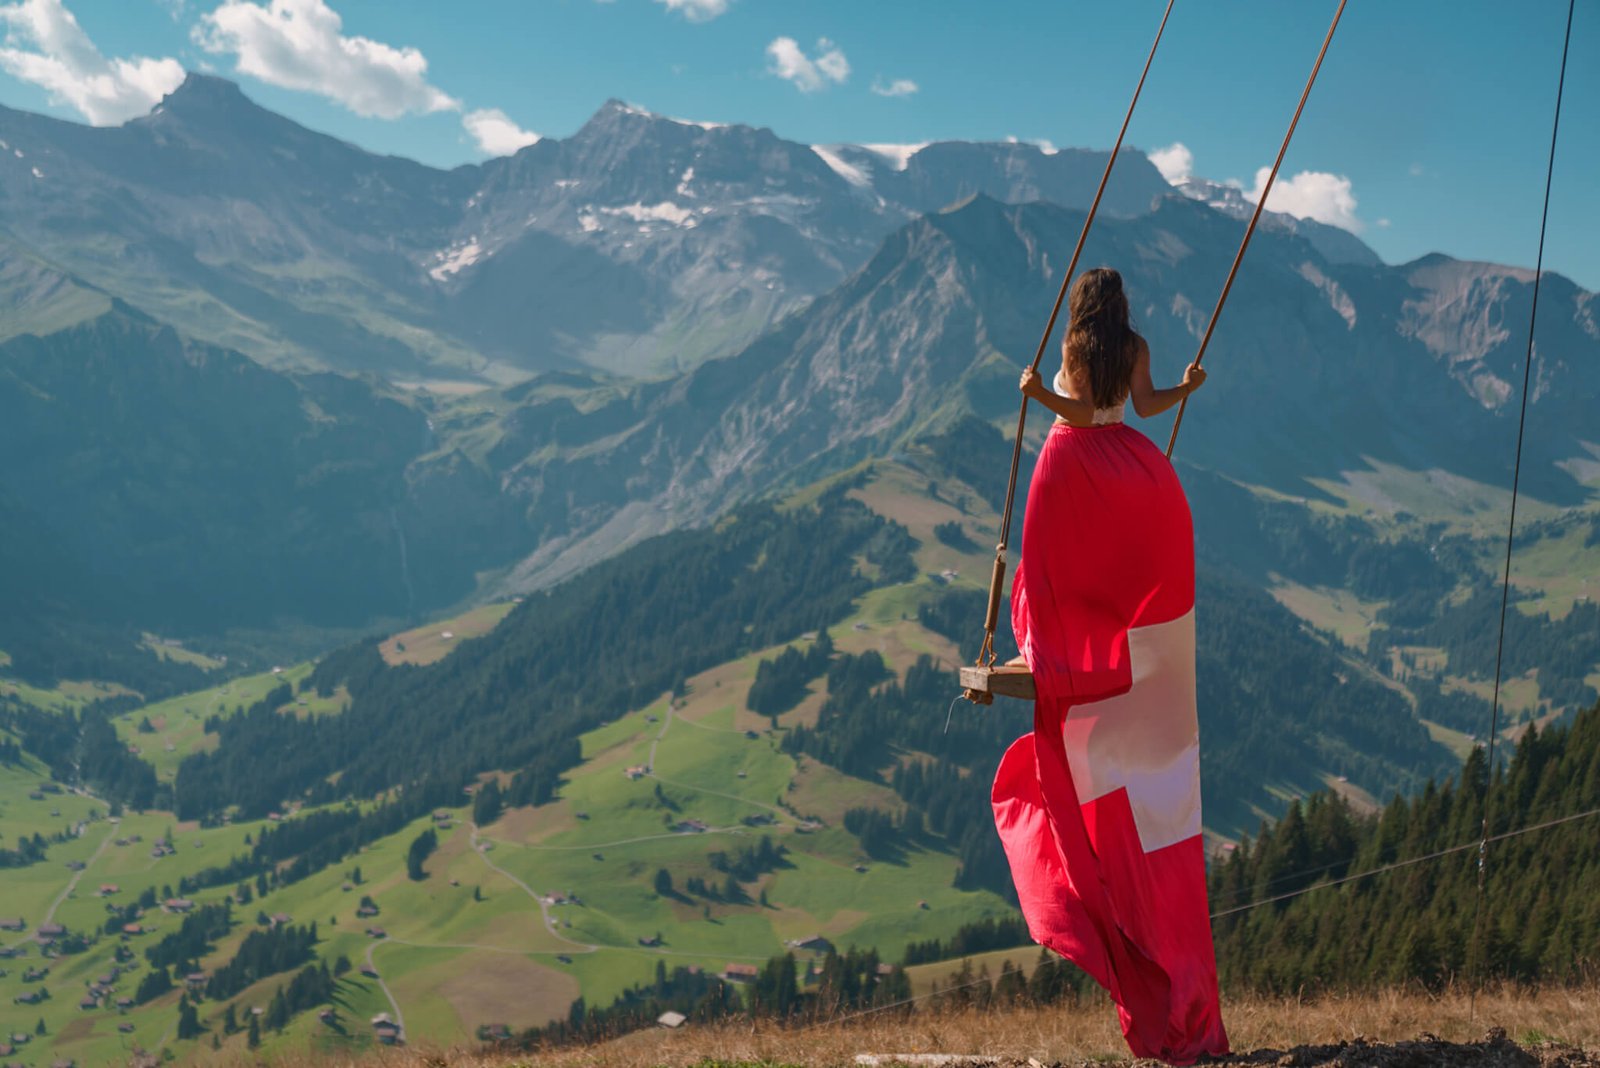 Giant Swing in Adelboden, good places to go in Switzerland